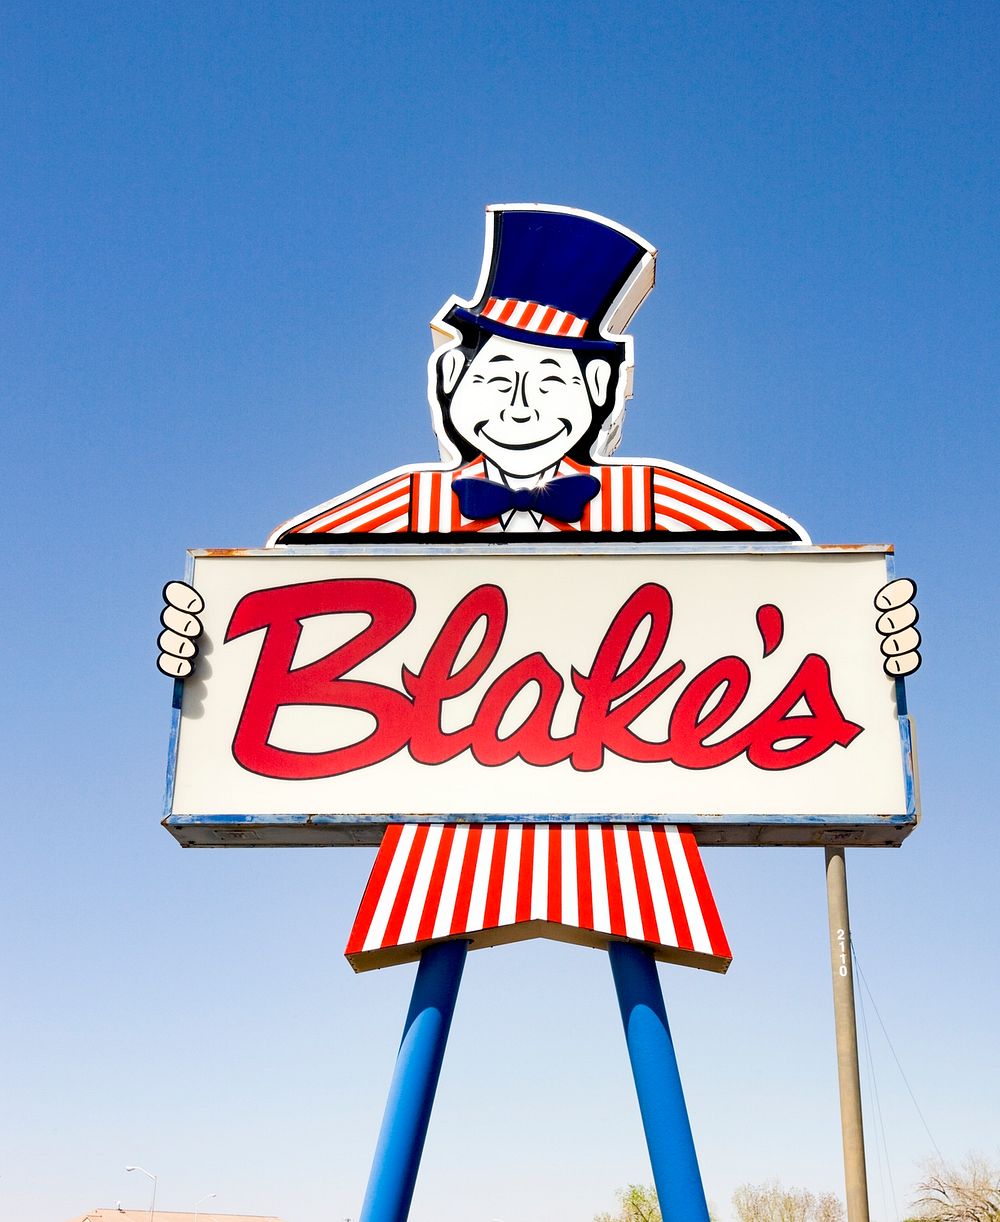 Blake's hamburger sign in Albuquerque, New Mexico. Original image from Carol M. Highsmith&rsquo;s America, Library of…